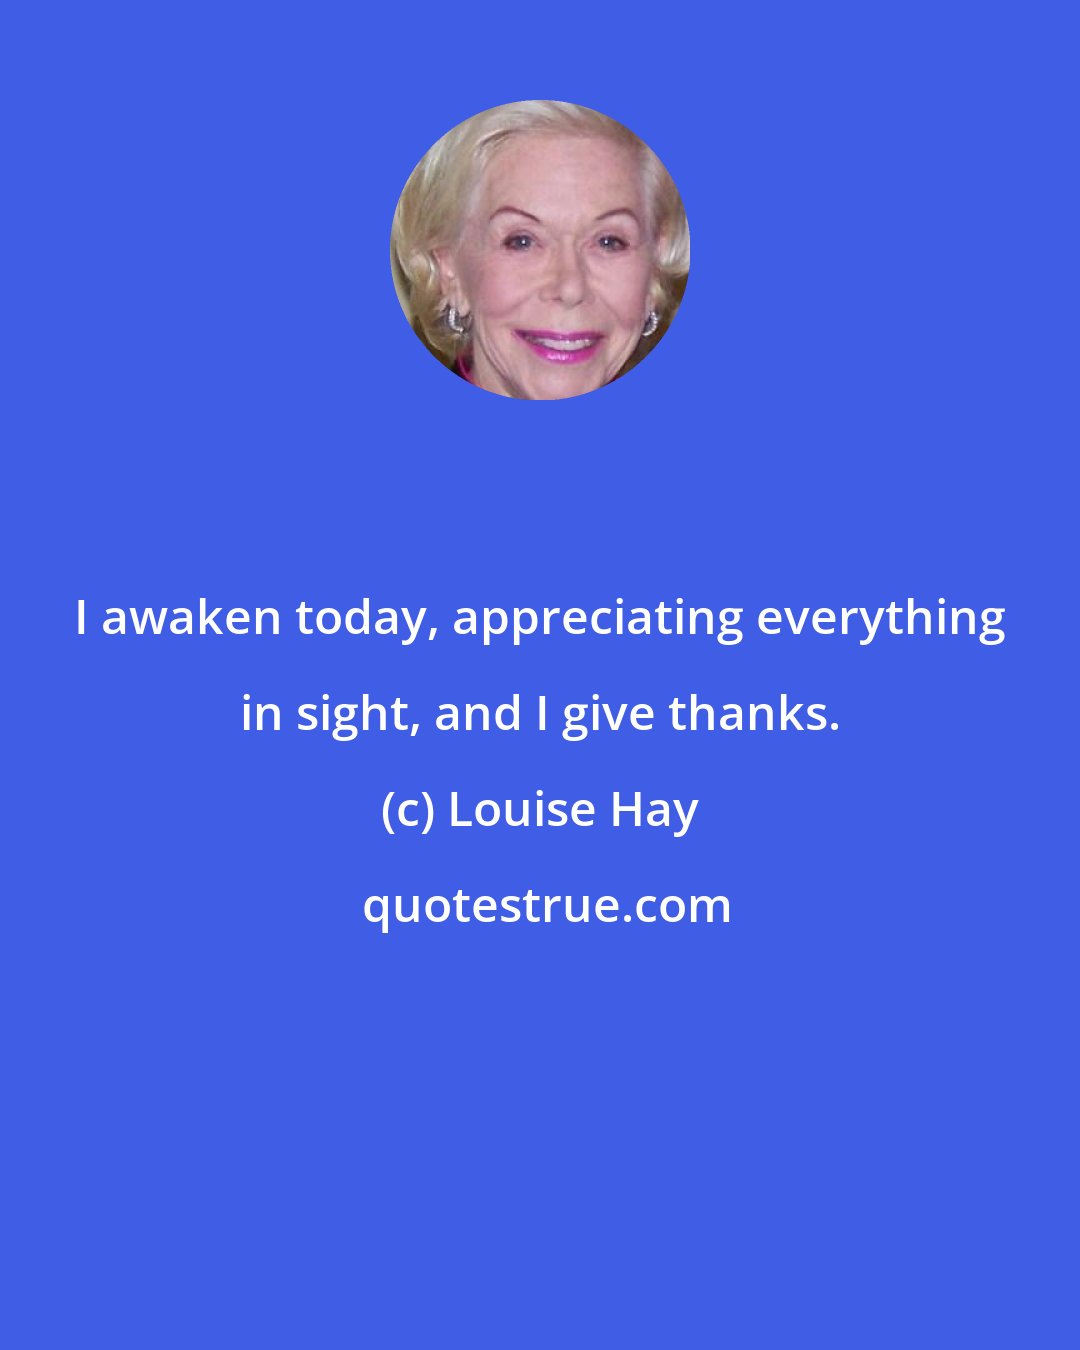 Louise Hay: I awaken today, appreciating everything in sight, and I give thanks.